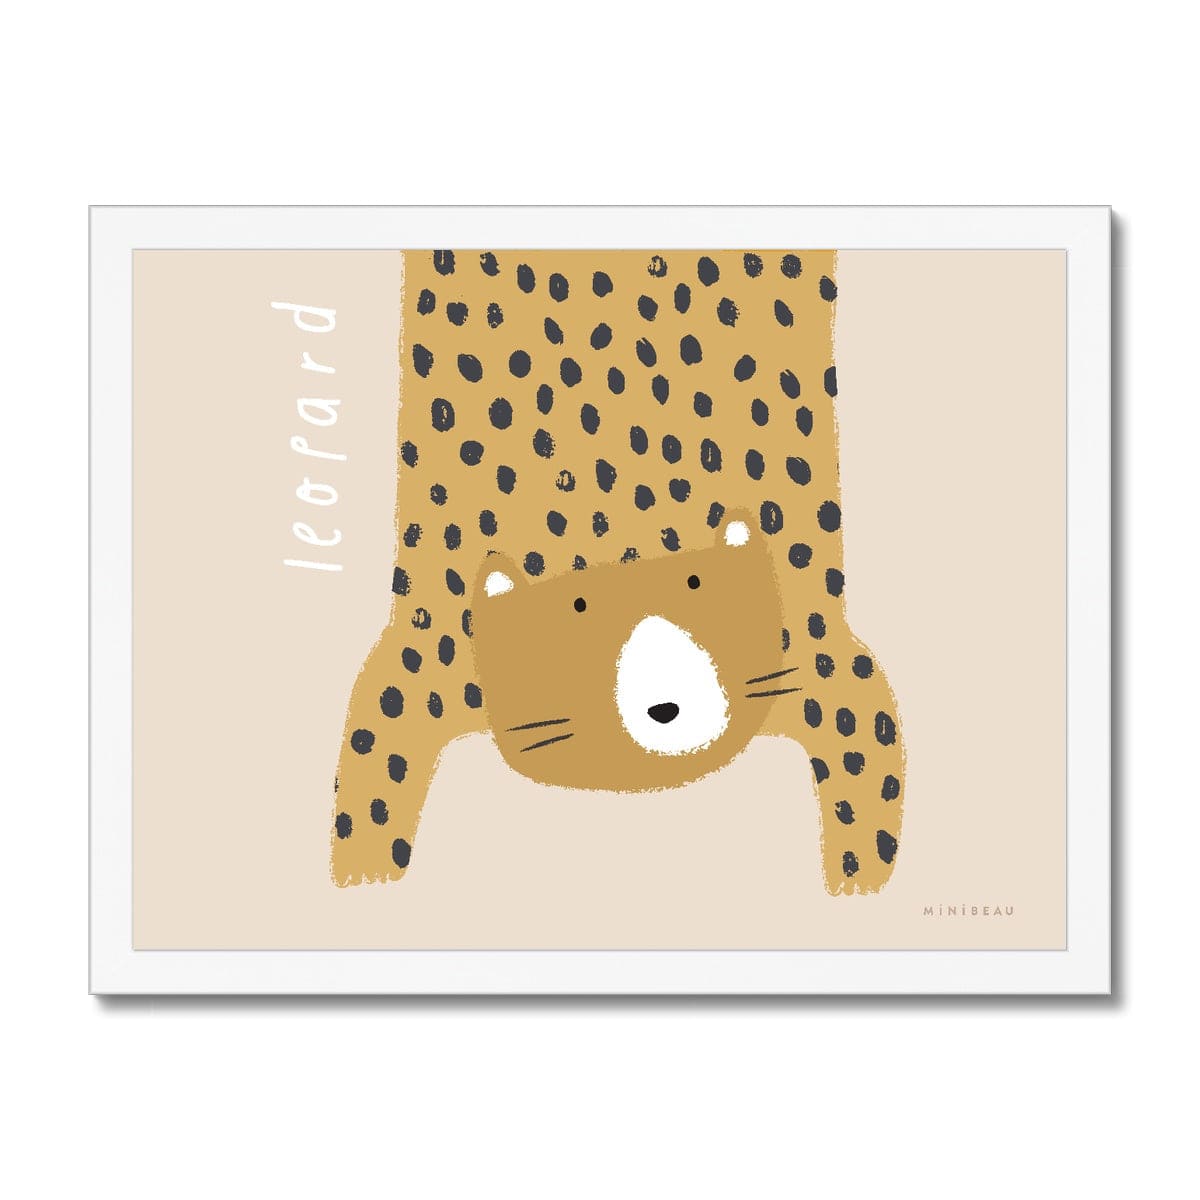 Our Leopard art print shows a hand-drawn leopard hanging down in to the picture, lifting it's head to look out at us on a beige background, with the word leopard written alongside it, in a white wooden frame.